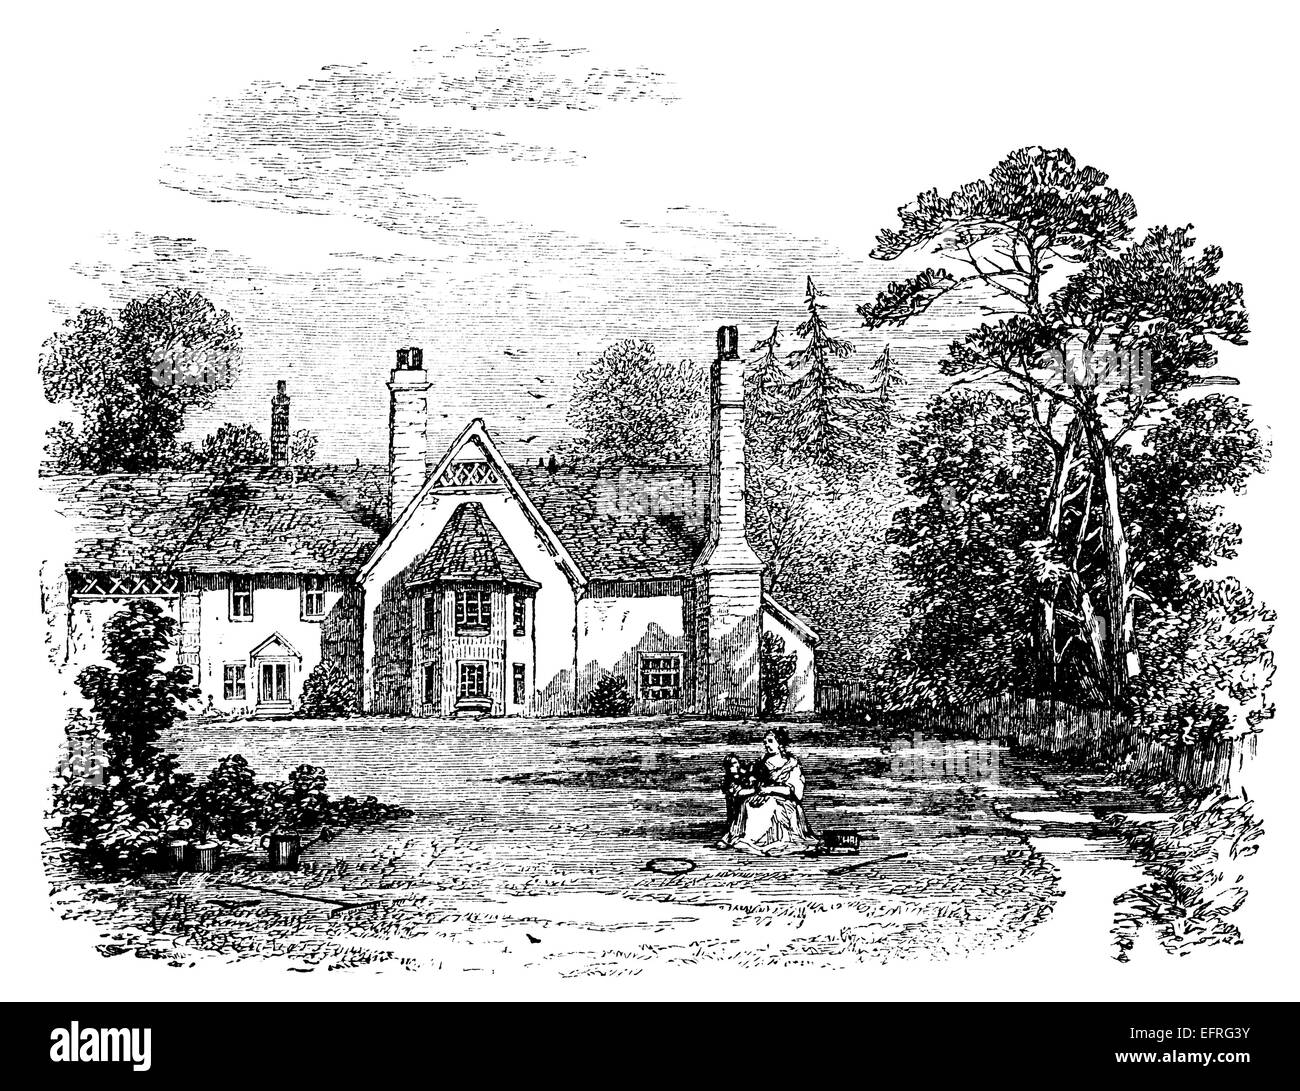 English country manor, from a book  titled 'English Pictures Drawn with Pen and Pencil' published in London ca. 1870. Stock Photo